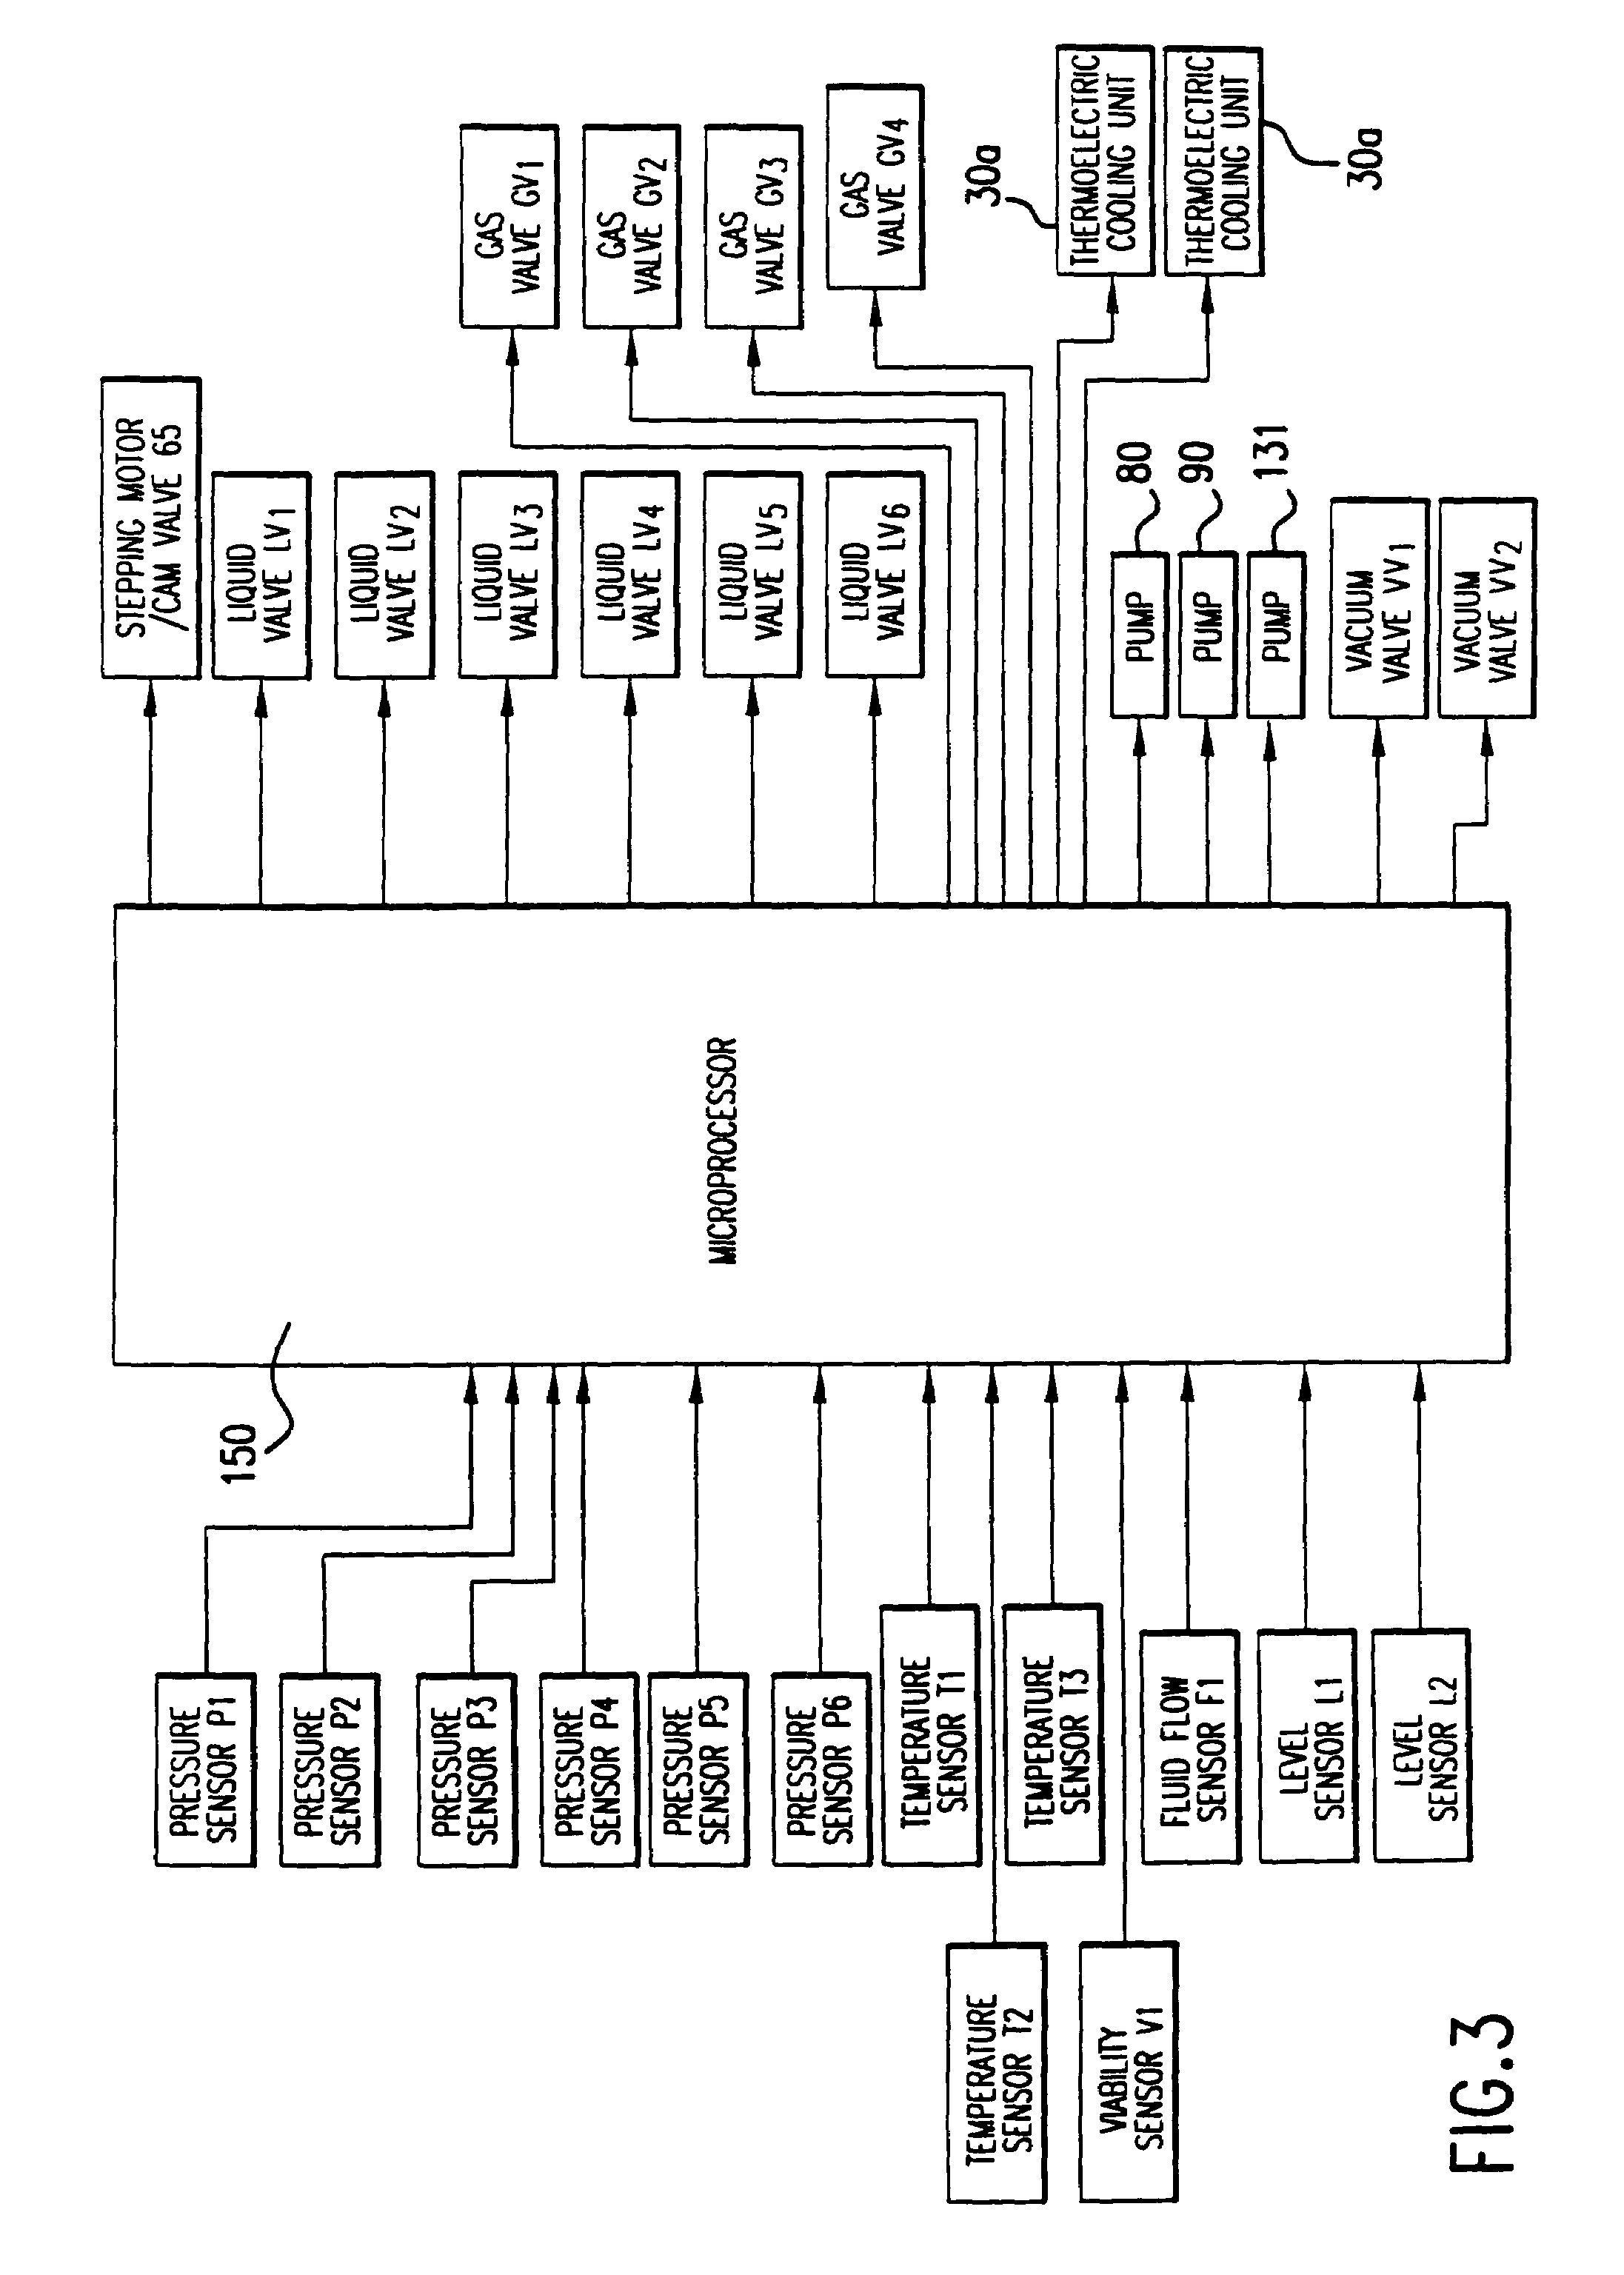 Method for maintaining and/or restoring viability of organs